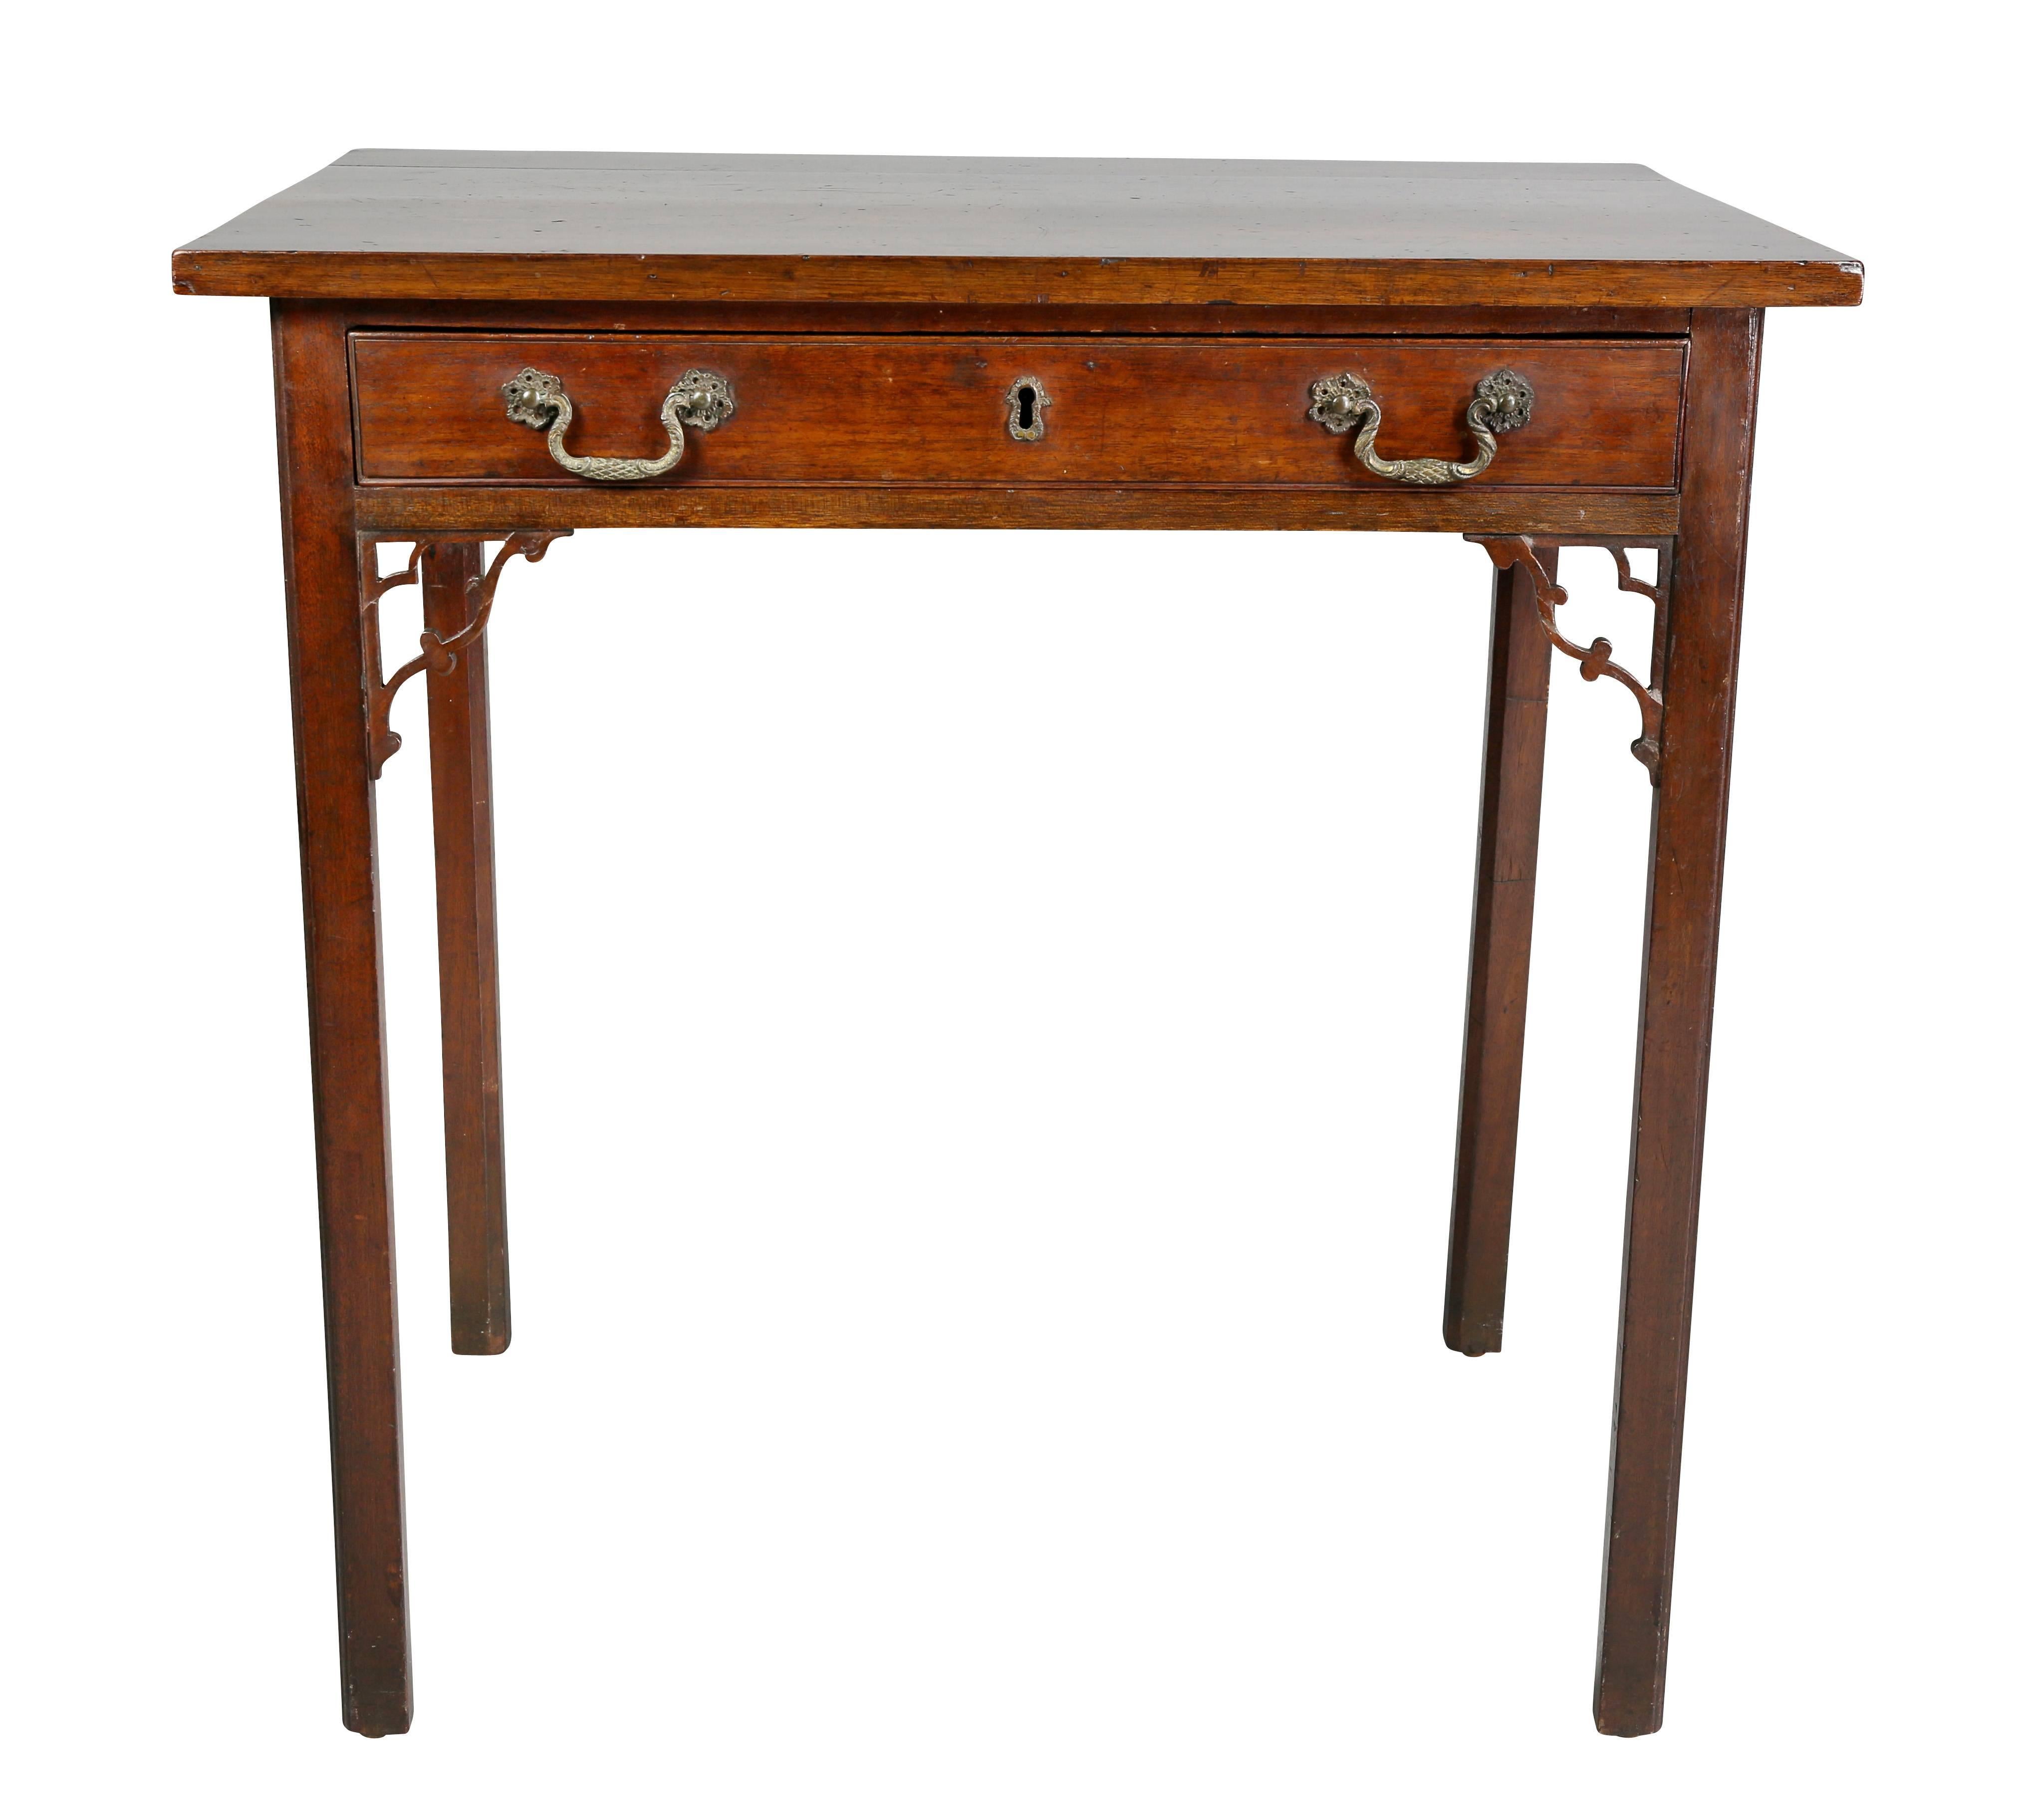 With rectangular top over a single drawer with two handles raised on square legs with shaped spandrels.